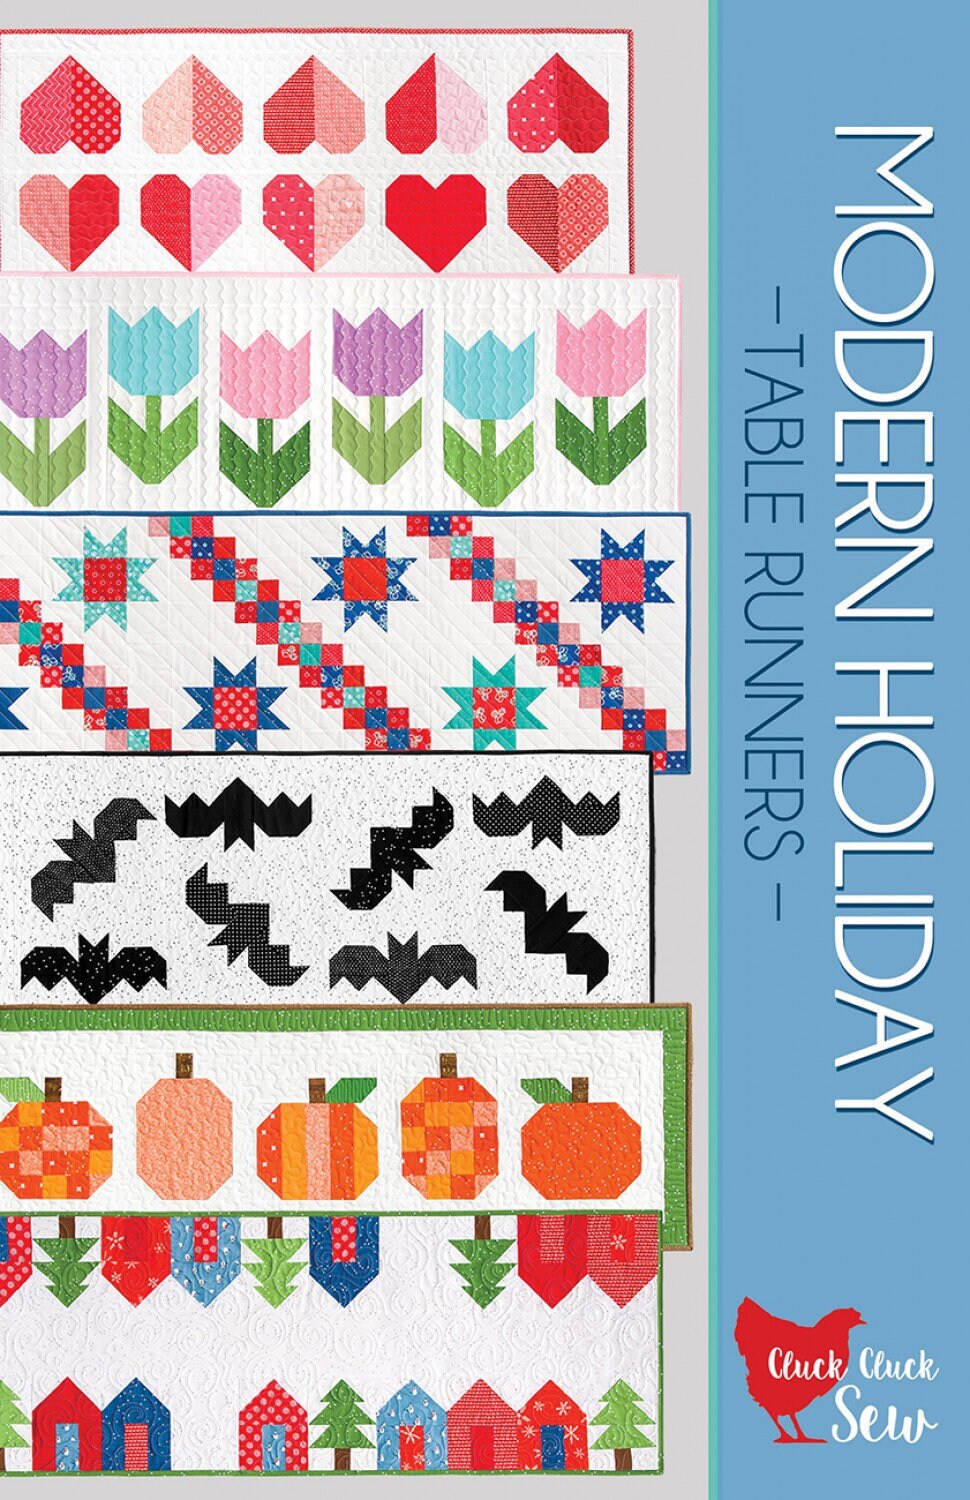 Modern Holiday Table Runner Patterns - Cluck Cluck Sew - 6 Table Runner Patterns